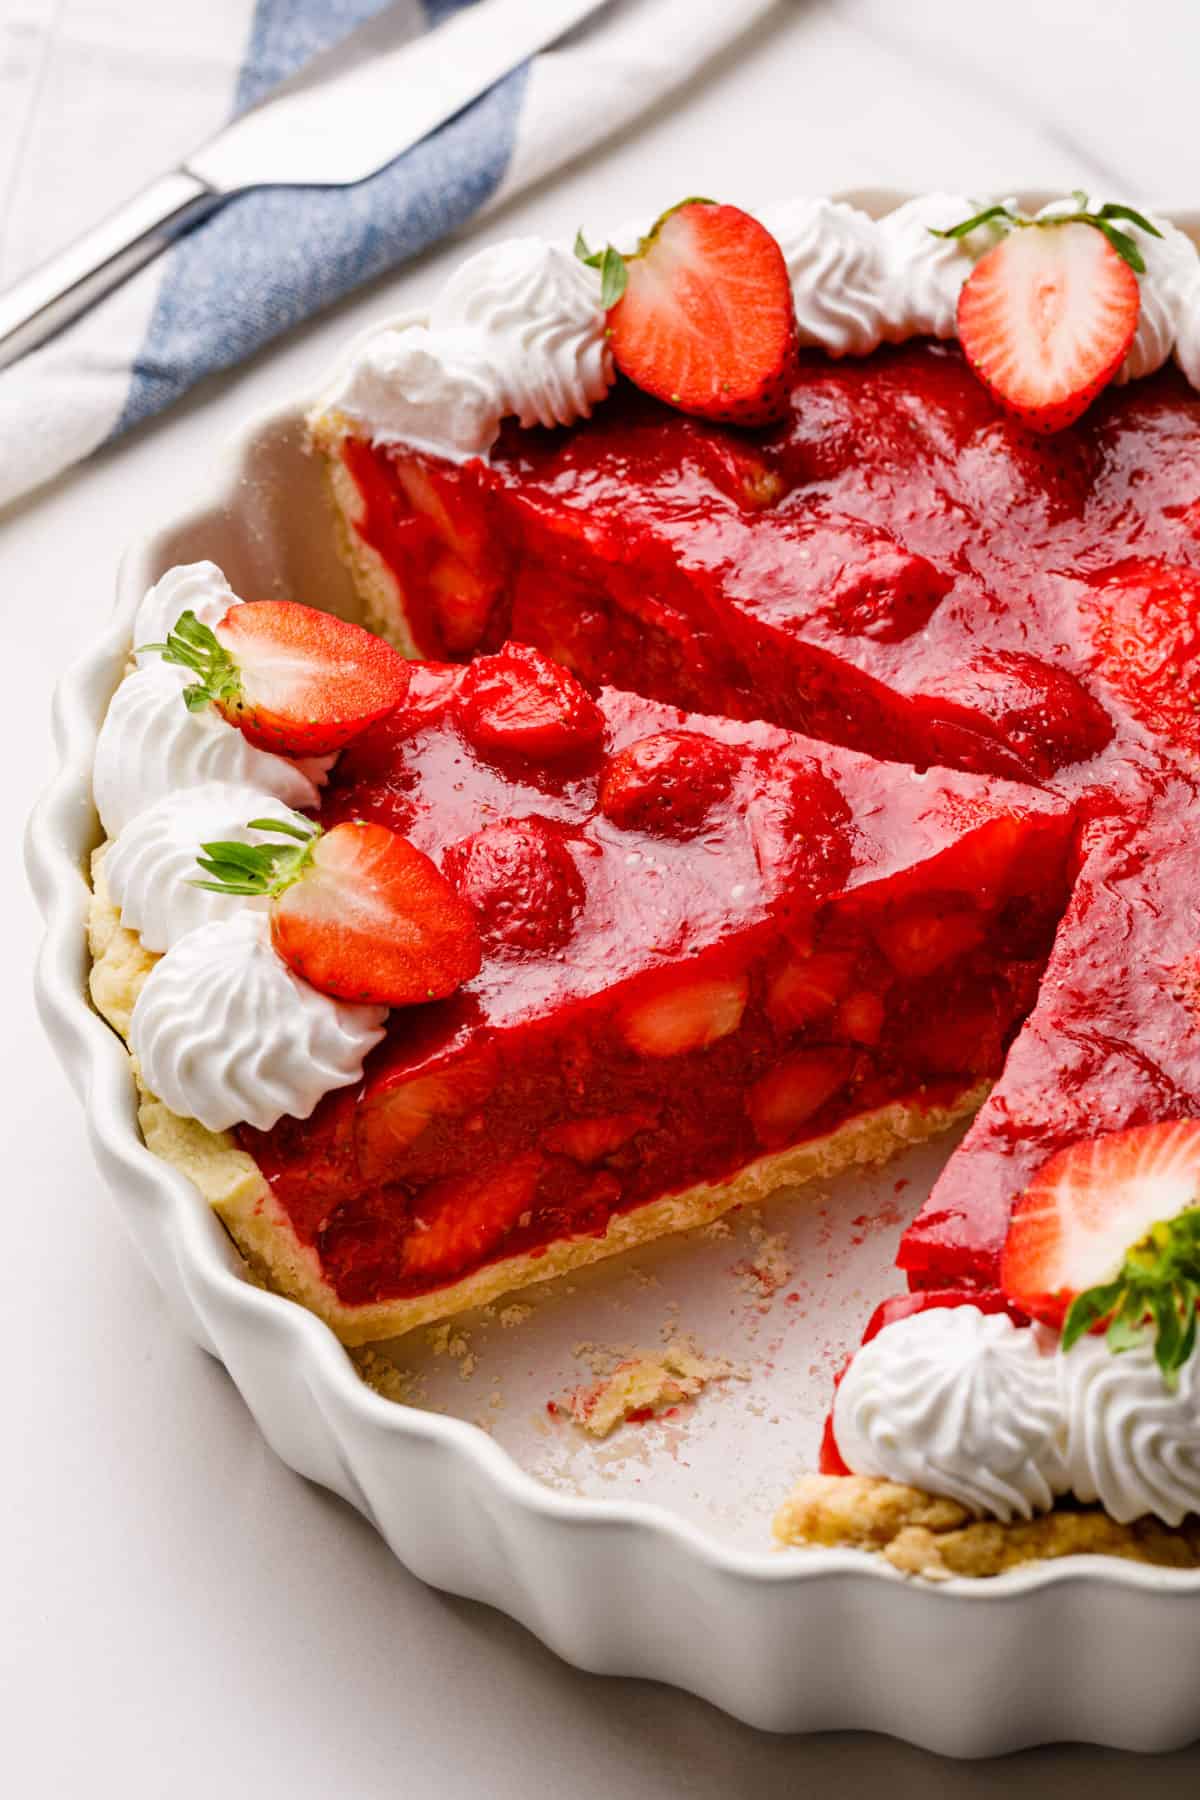 strawberry pie in a pie dish with a slice taken out showing the cross section